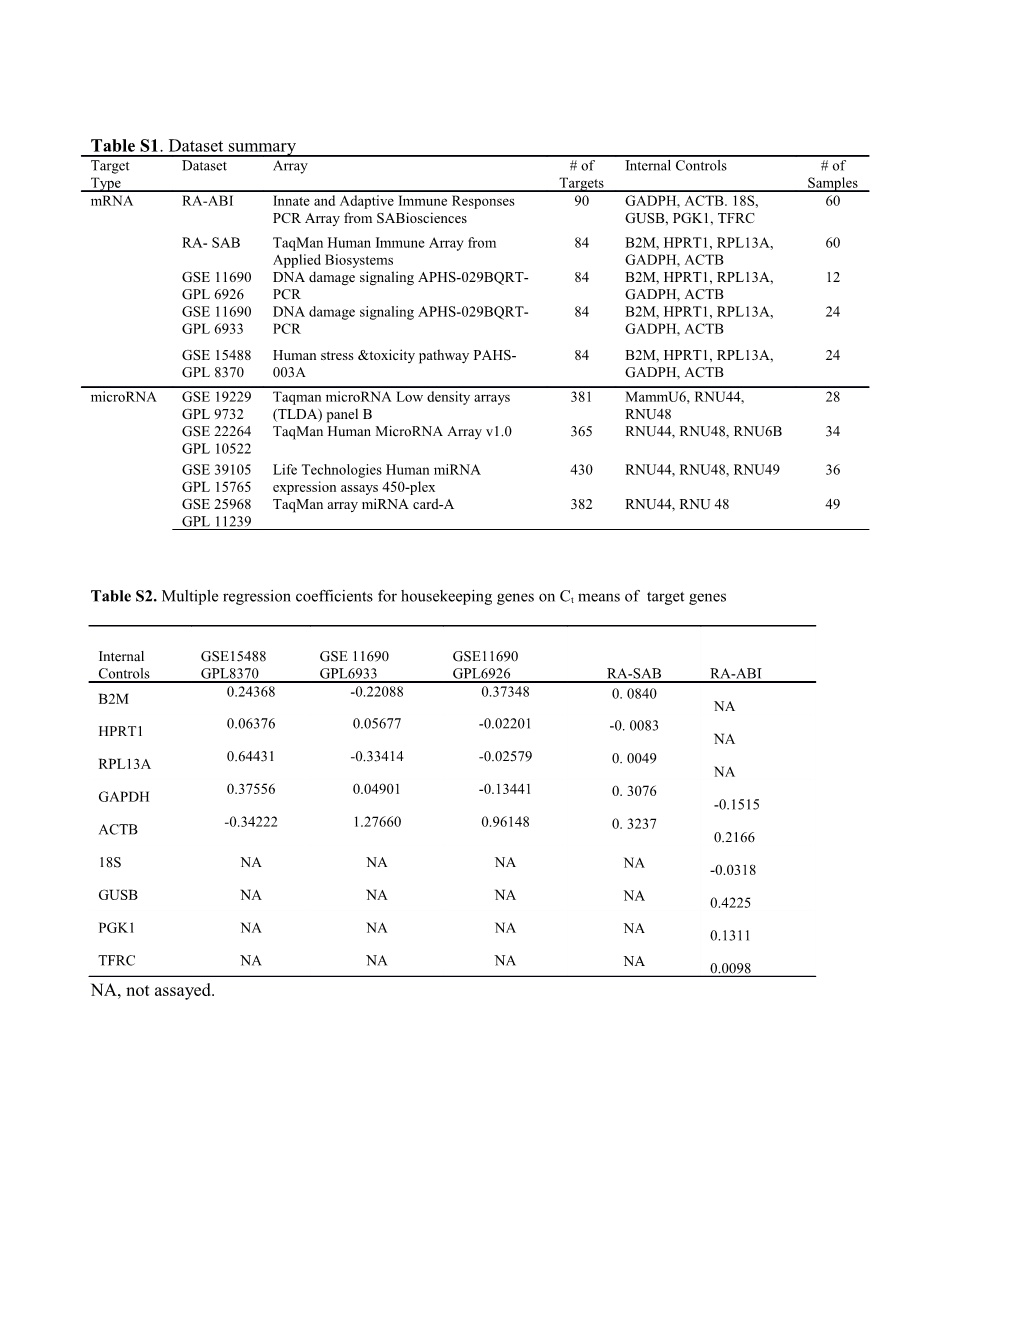 Table S2. Multiple Regression Coefficients for Housekeeping Genes on Ct Means of Target Genes